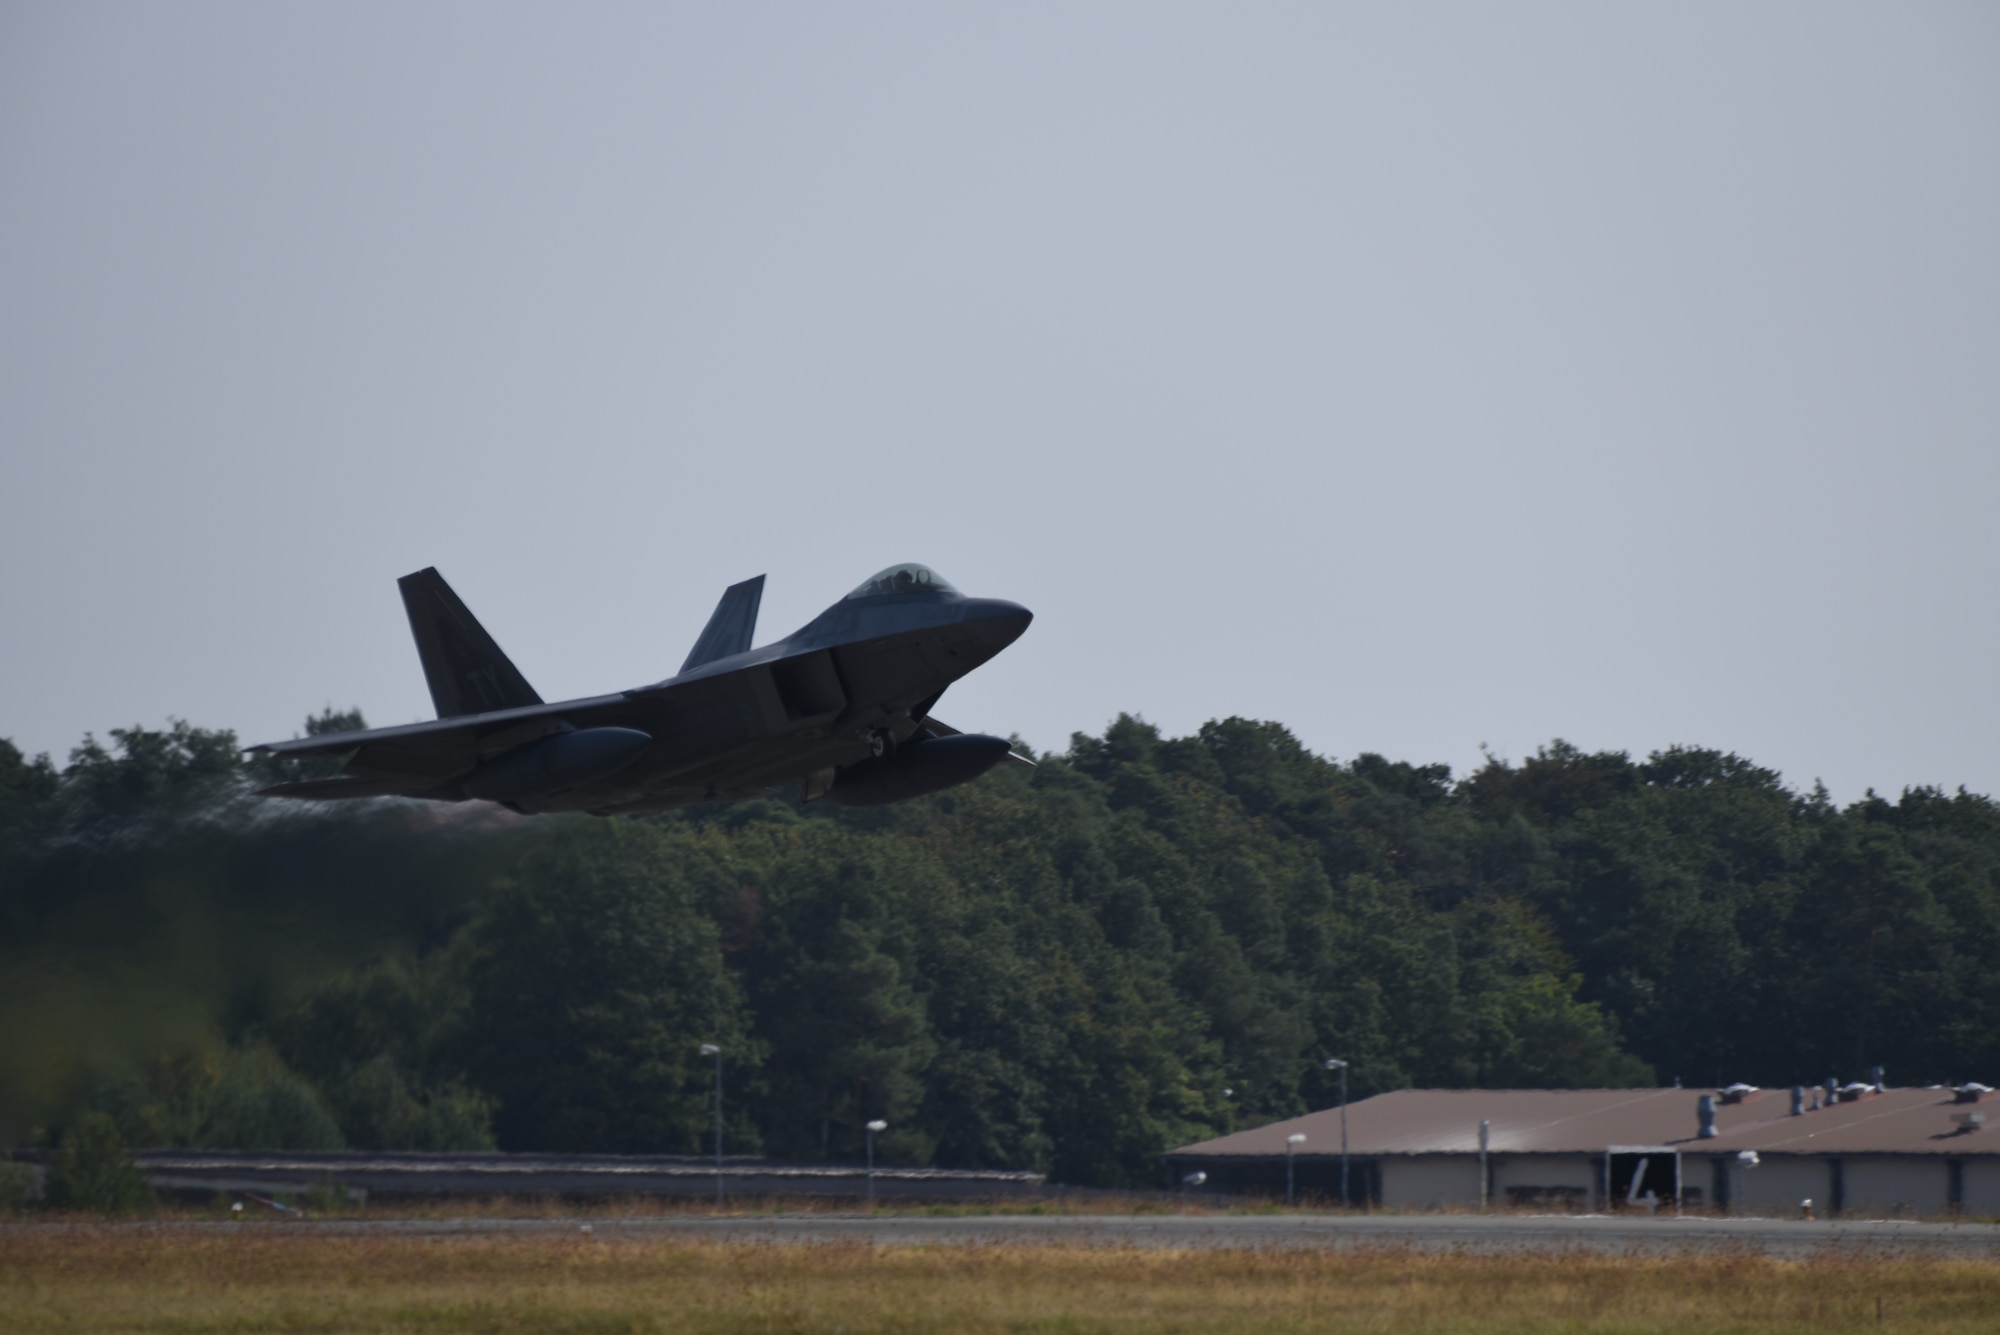 A U.S. Air Force F-22 Raptor from the 95th Fighter Squadron, 325th Fighter Wing, at Tyndall Air Force Base, Fla., takes-off from Spangdahlem Air Base, Germany, Aug. 29, 2018. The F-22s are heading back home after completing a Flying Training Deployment with other NATO partners. (U.S. Air Force photo by Airman 1st Class Branden Rae)